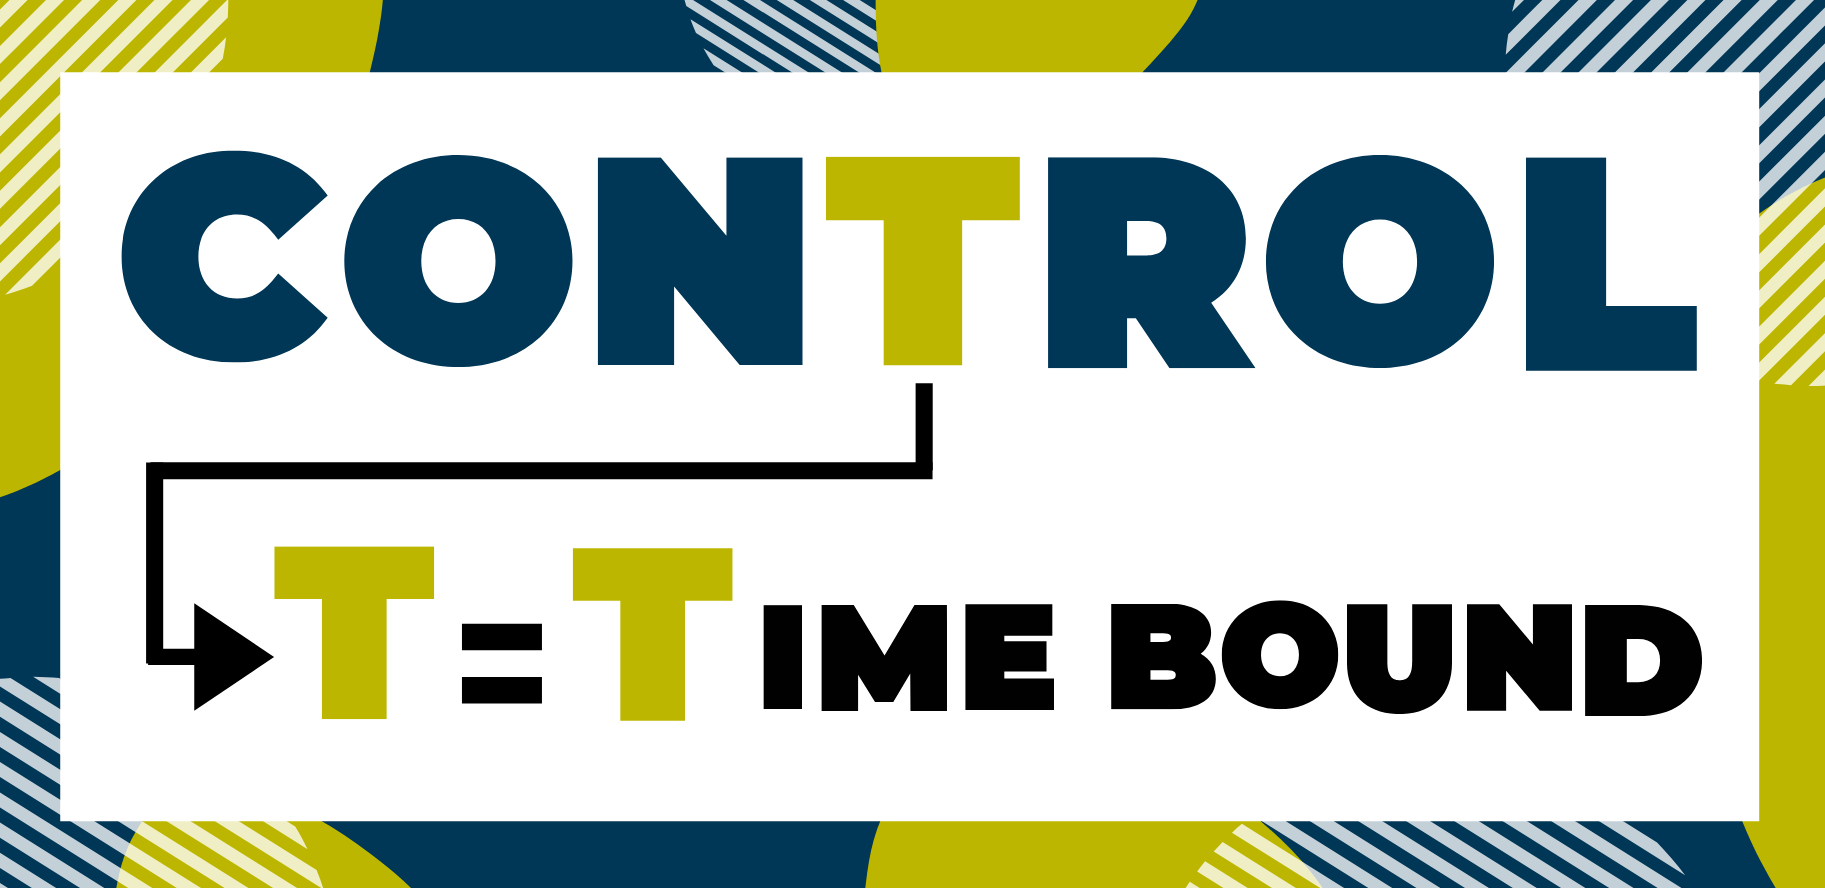 Letter t in control. T = Time bound.